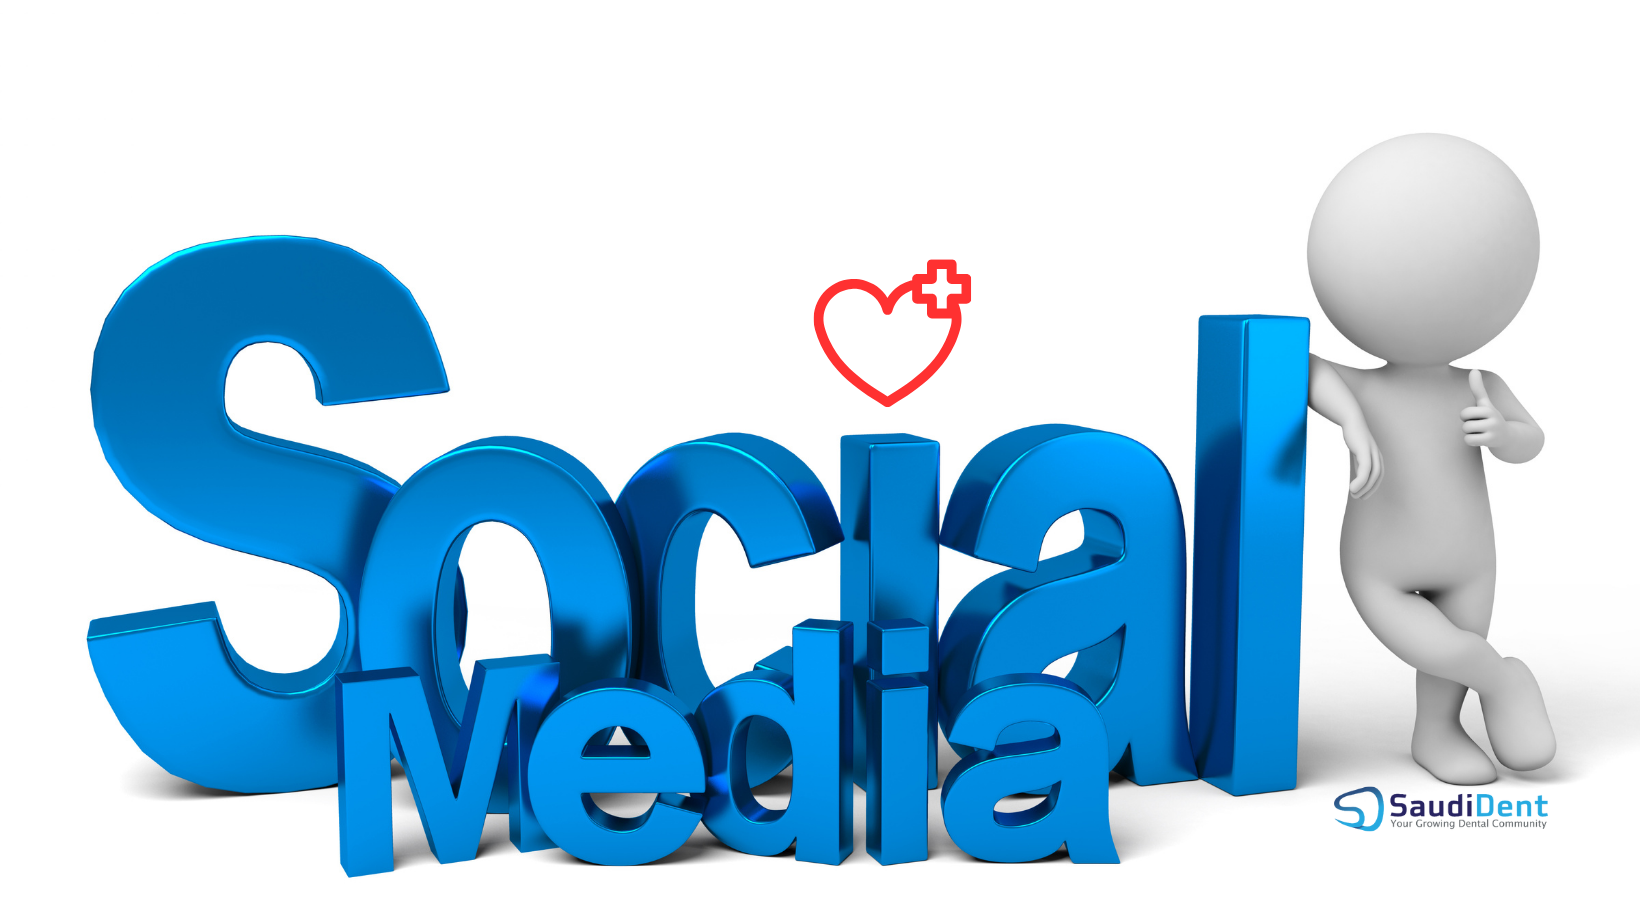 The Need for Monitoring Social Media Health Related Contents